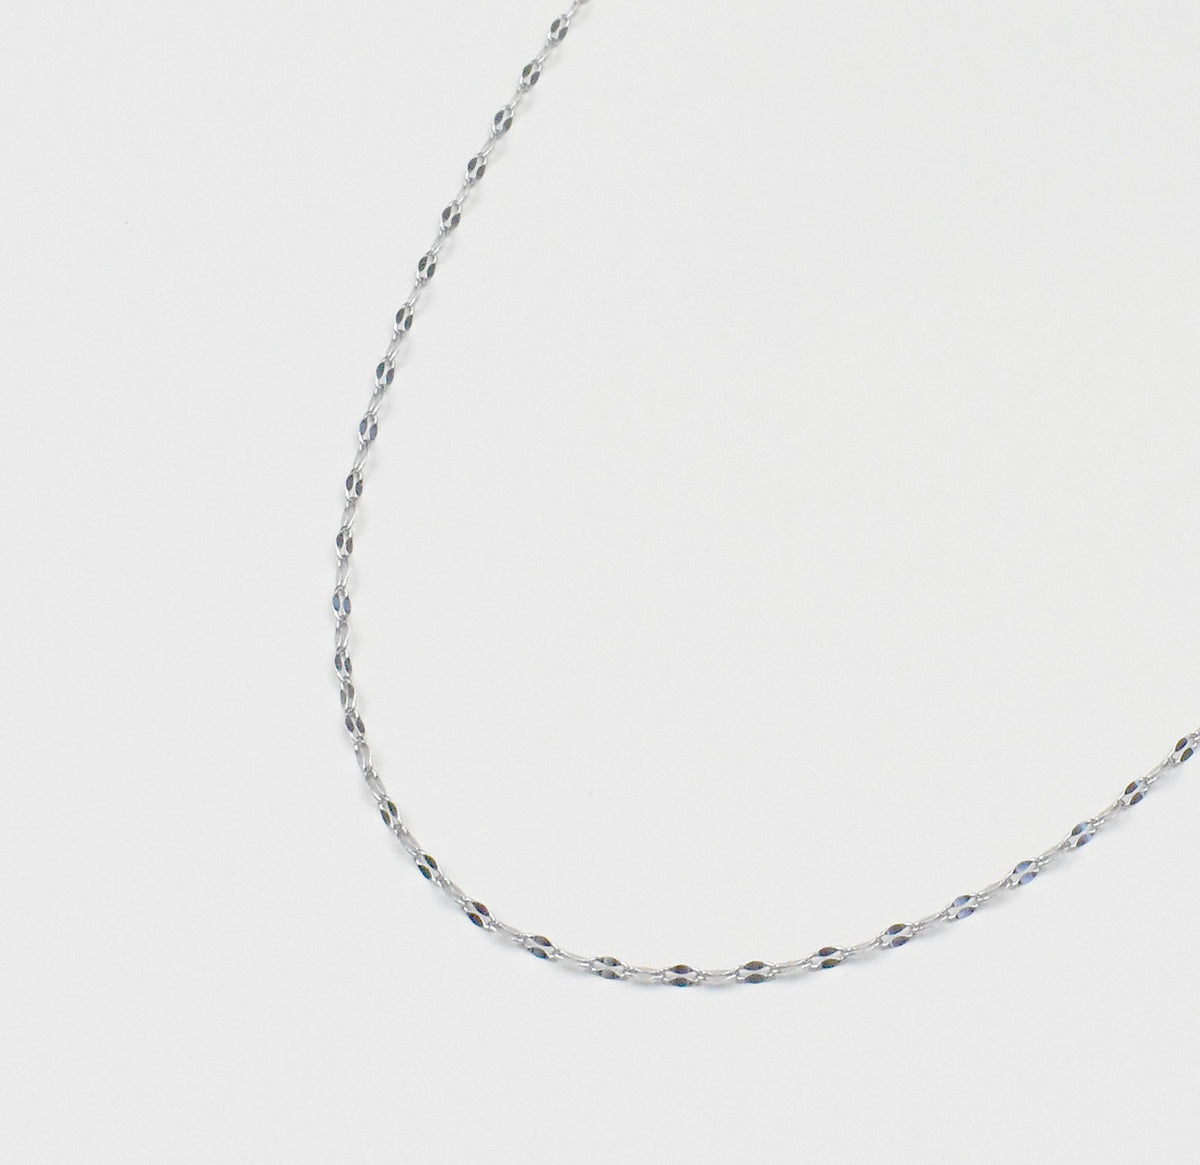 ELSIE SILVER DAINTY LACE CHAIN NECKLACE